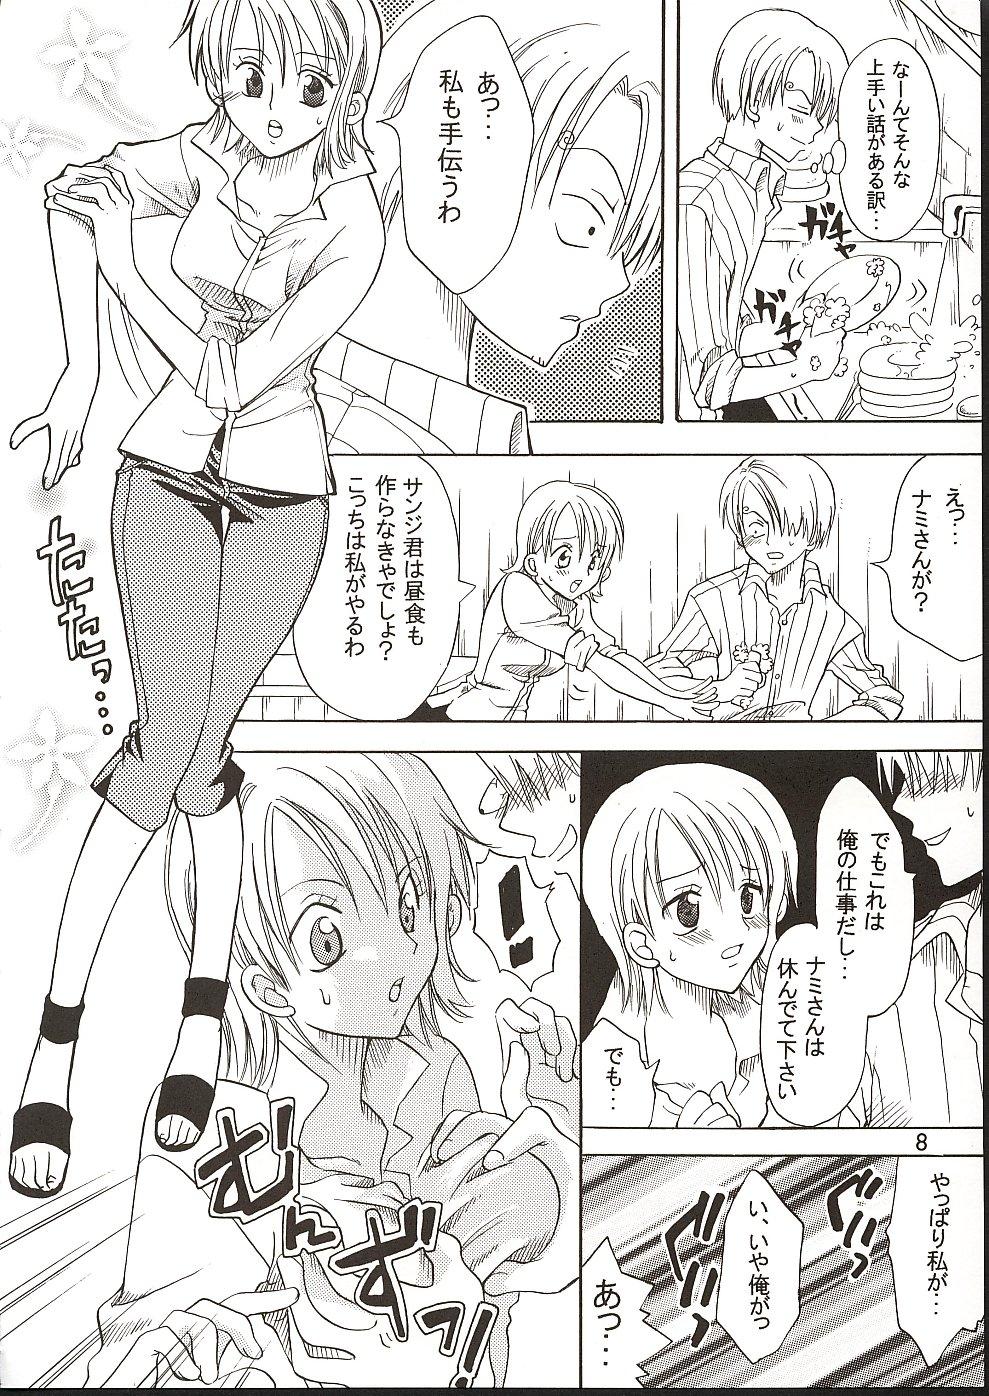 Gaystraight Shiawase Punch! 3 - One piece Buceta - Page 7